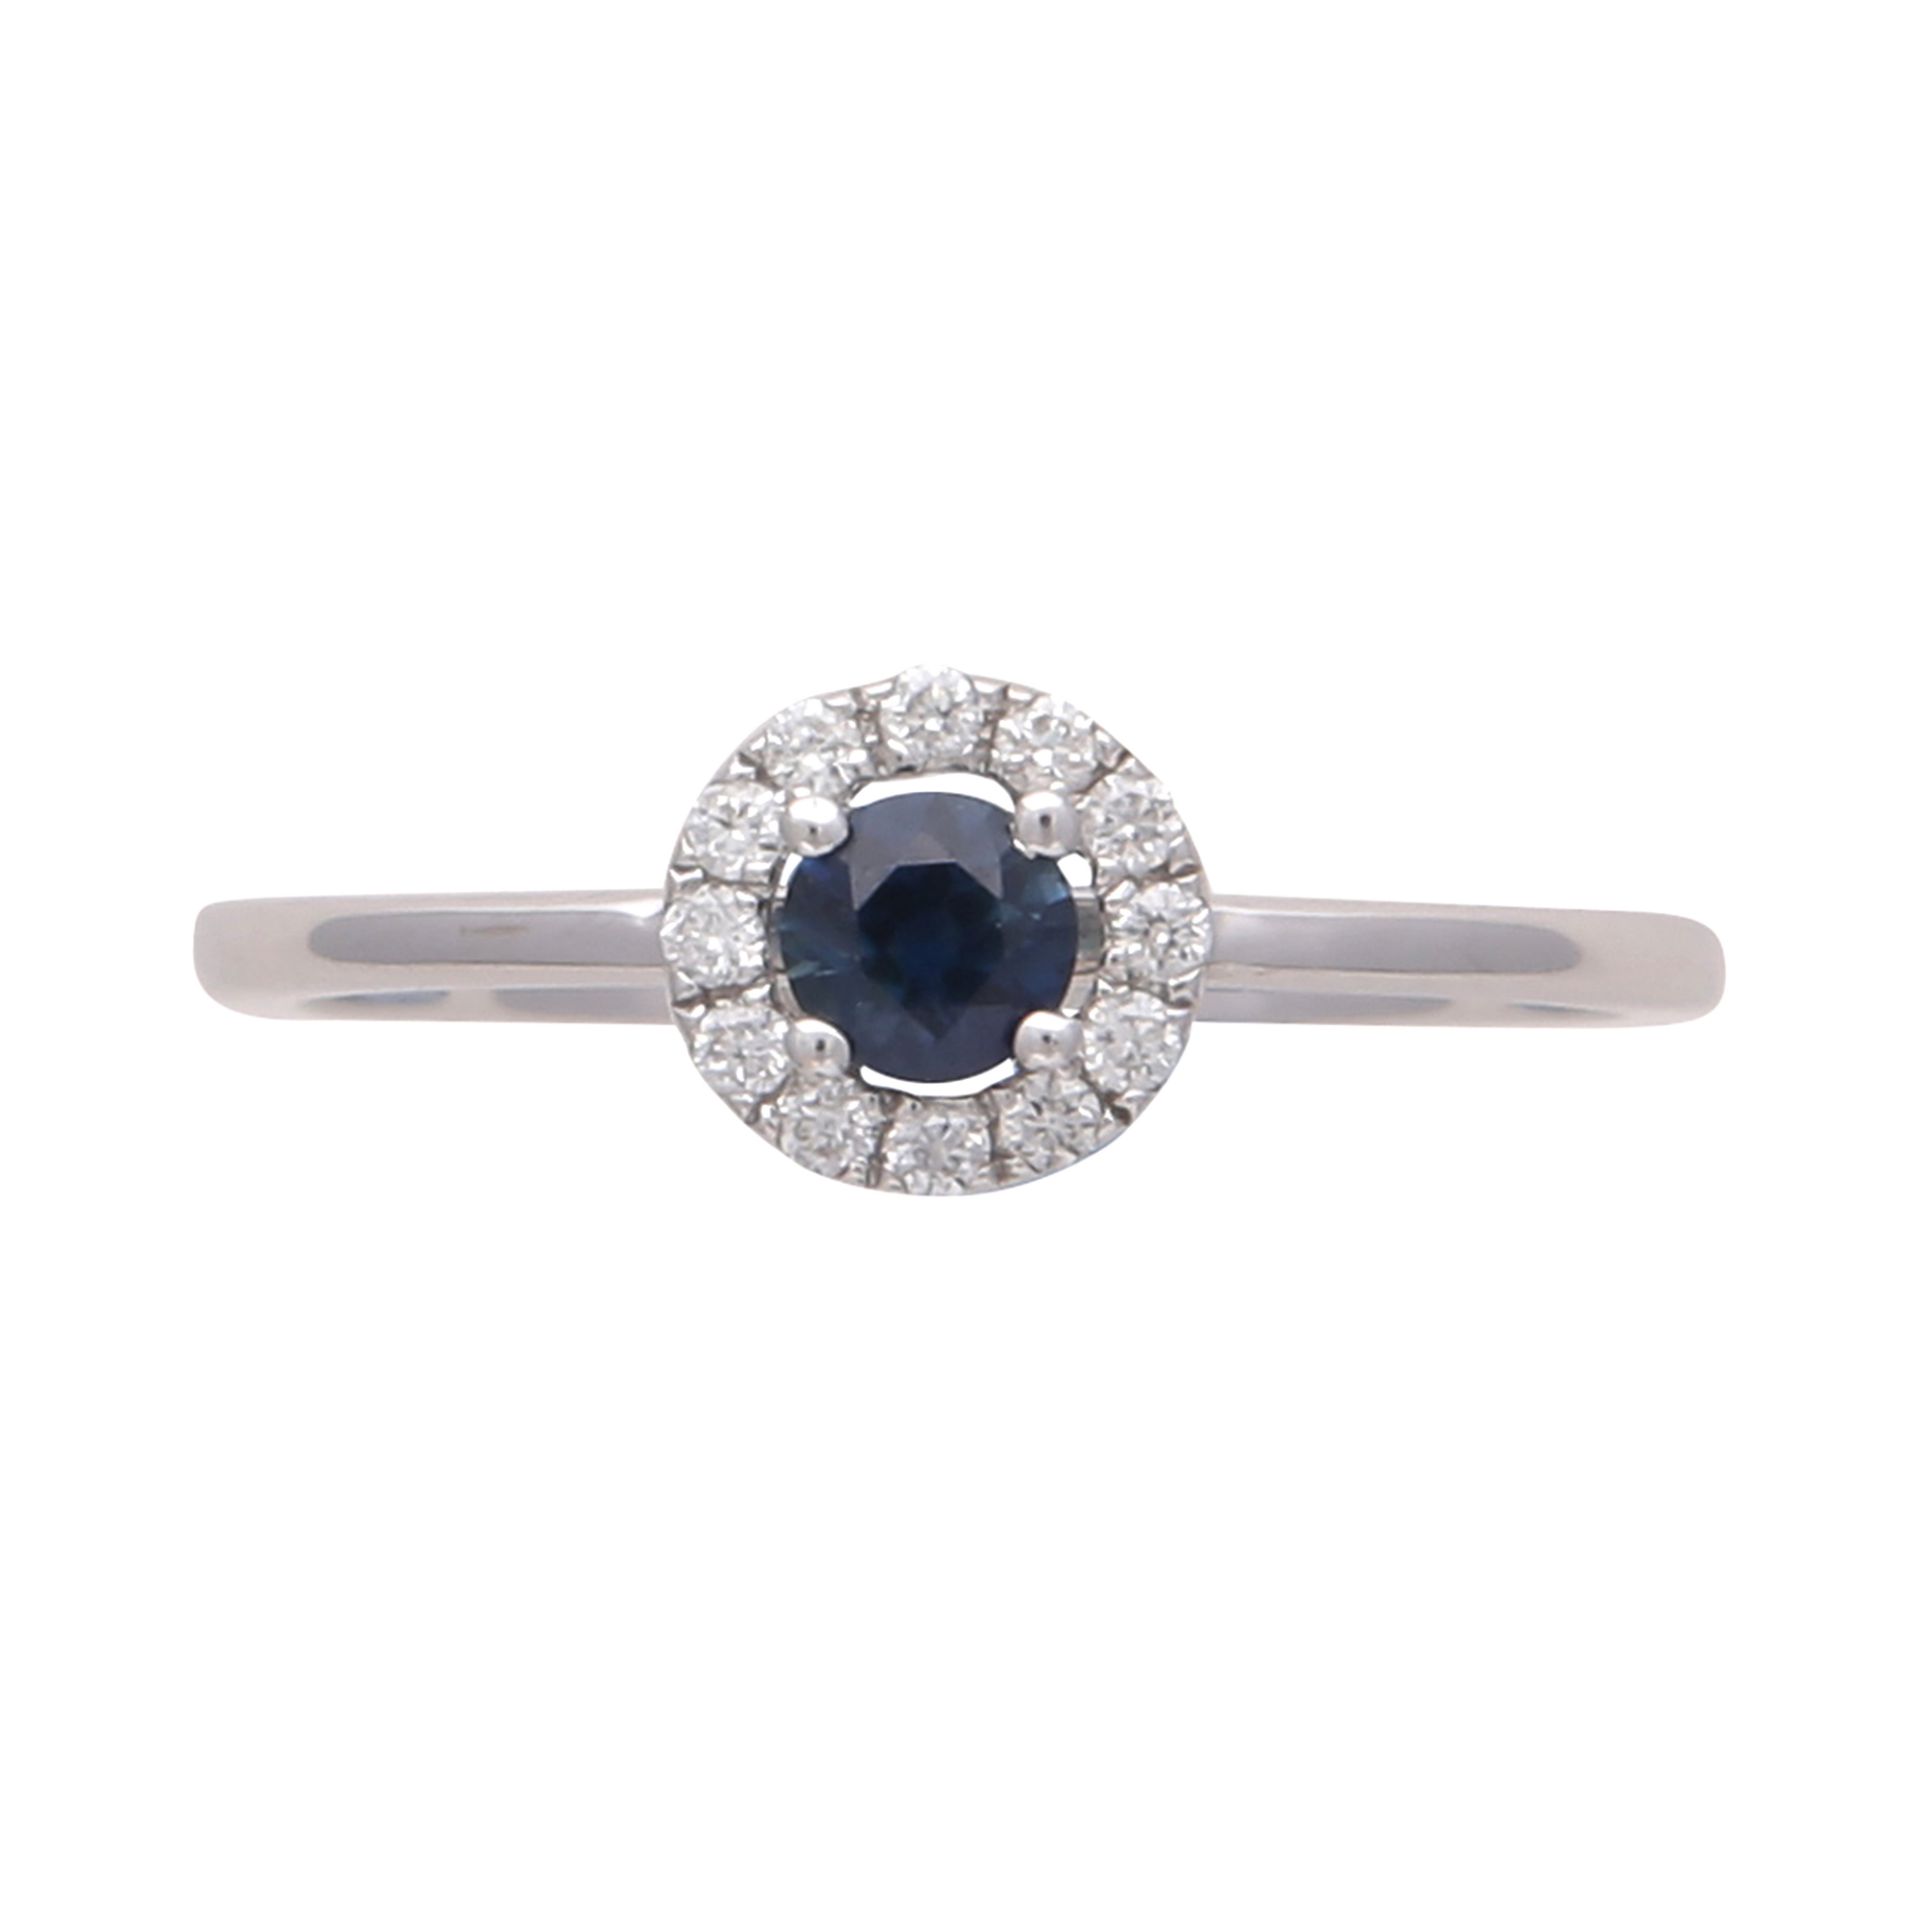 A sapphire and diamond cluster ring in 18ct white gold set with a round cut sapphire surrounded by a